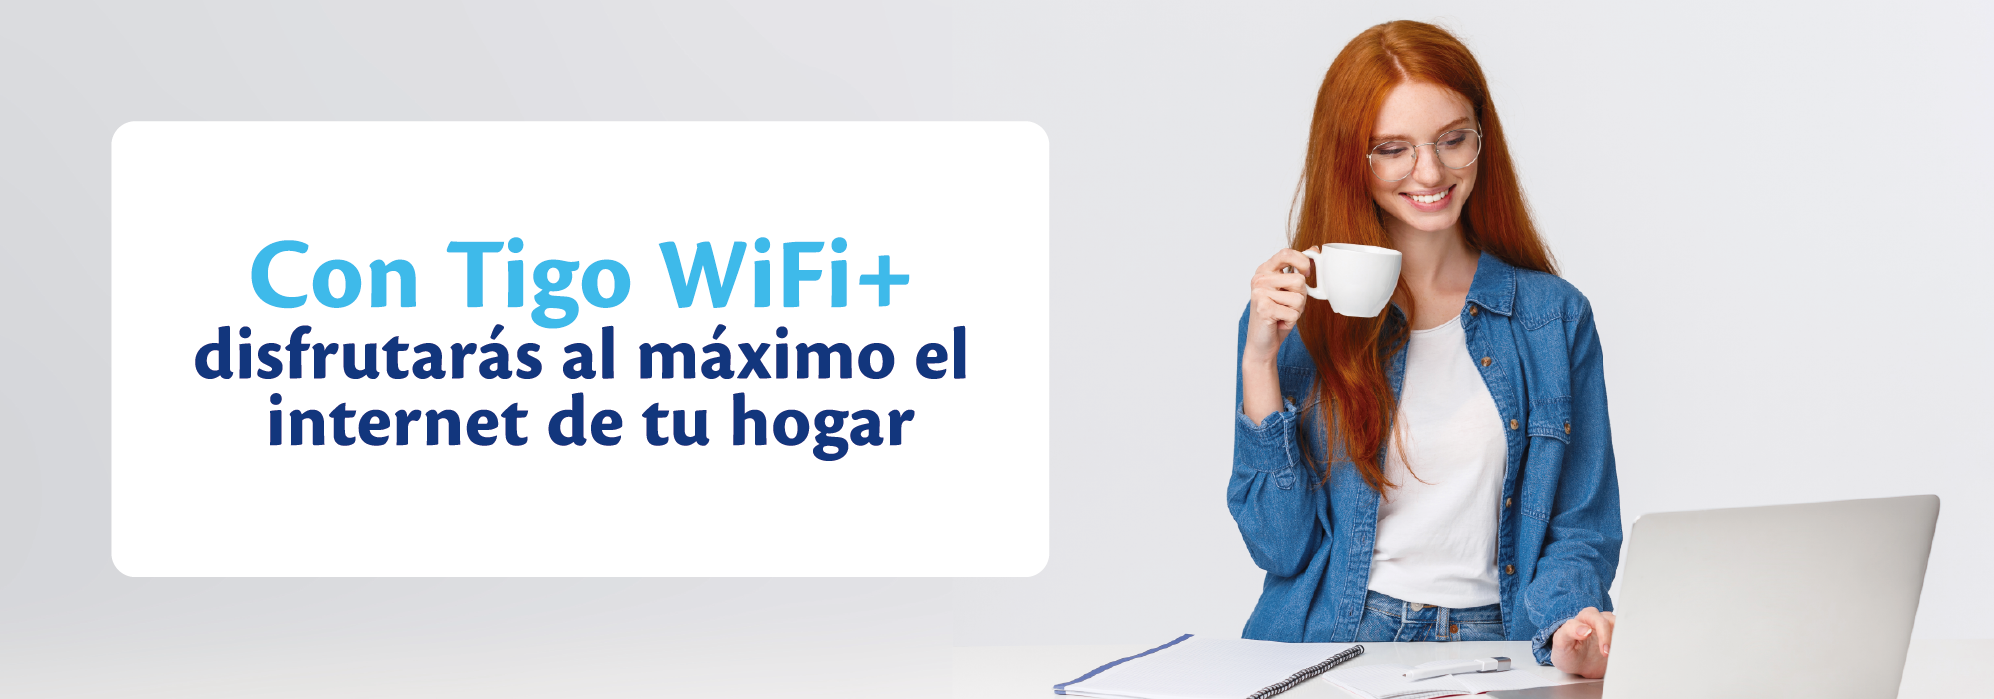 aw-banner_tips_wifi+.png